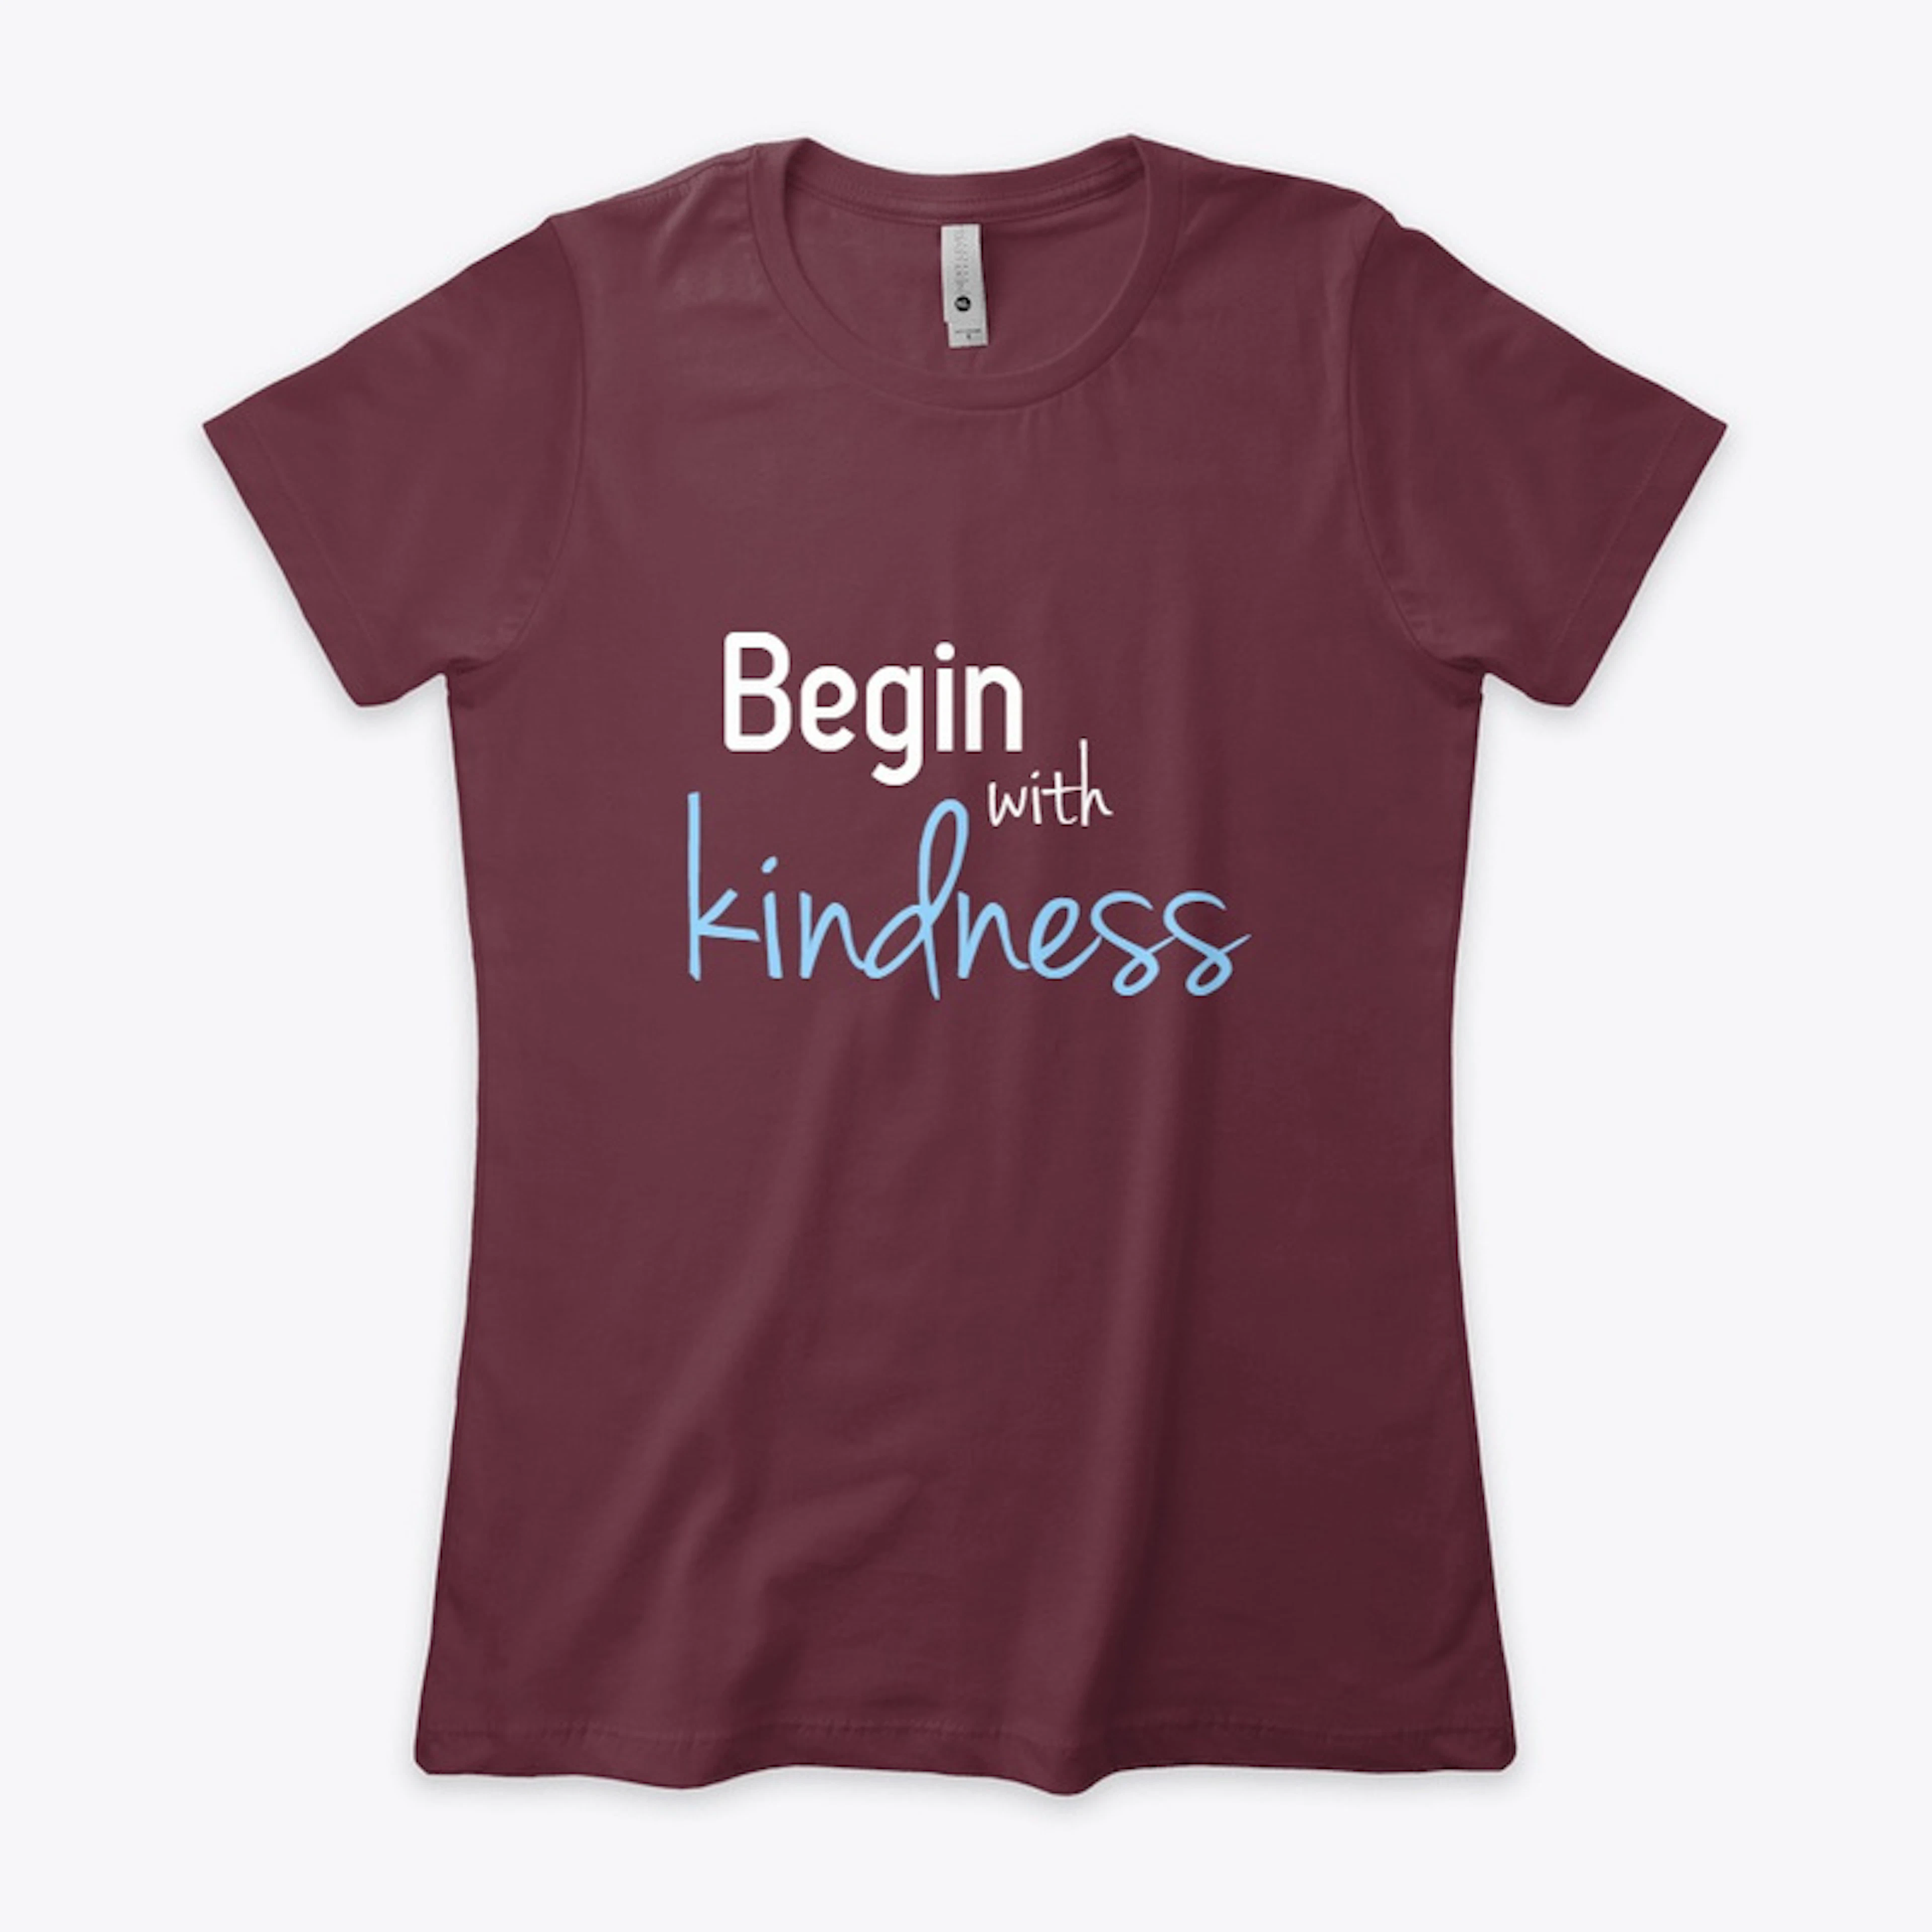 Begin with Kindness